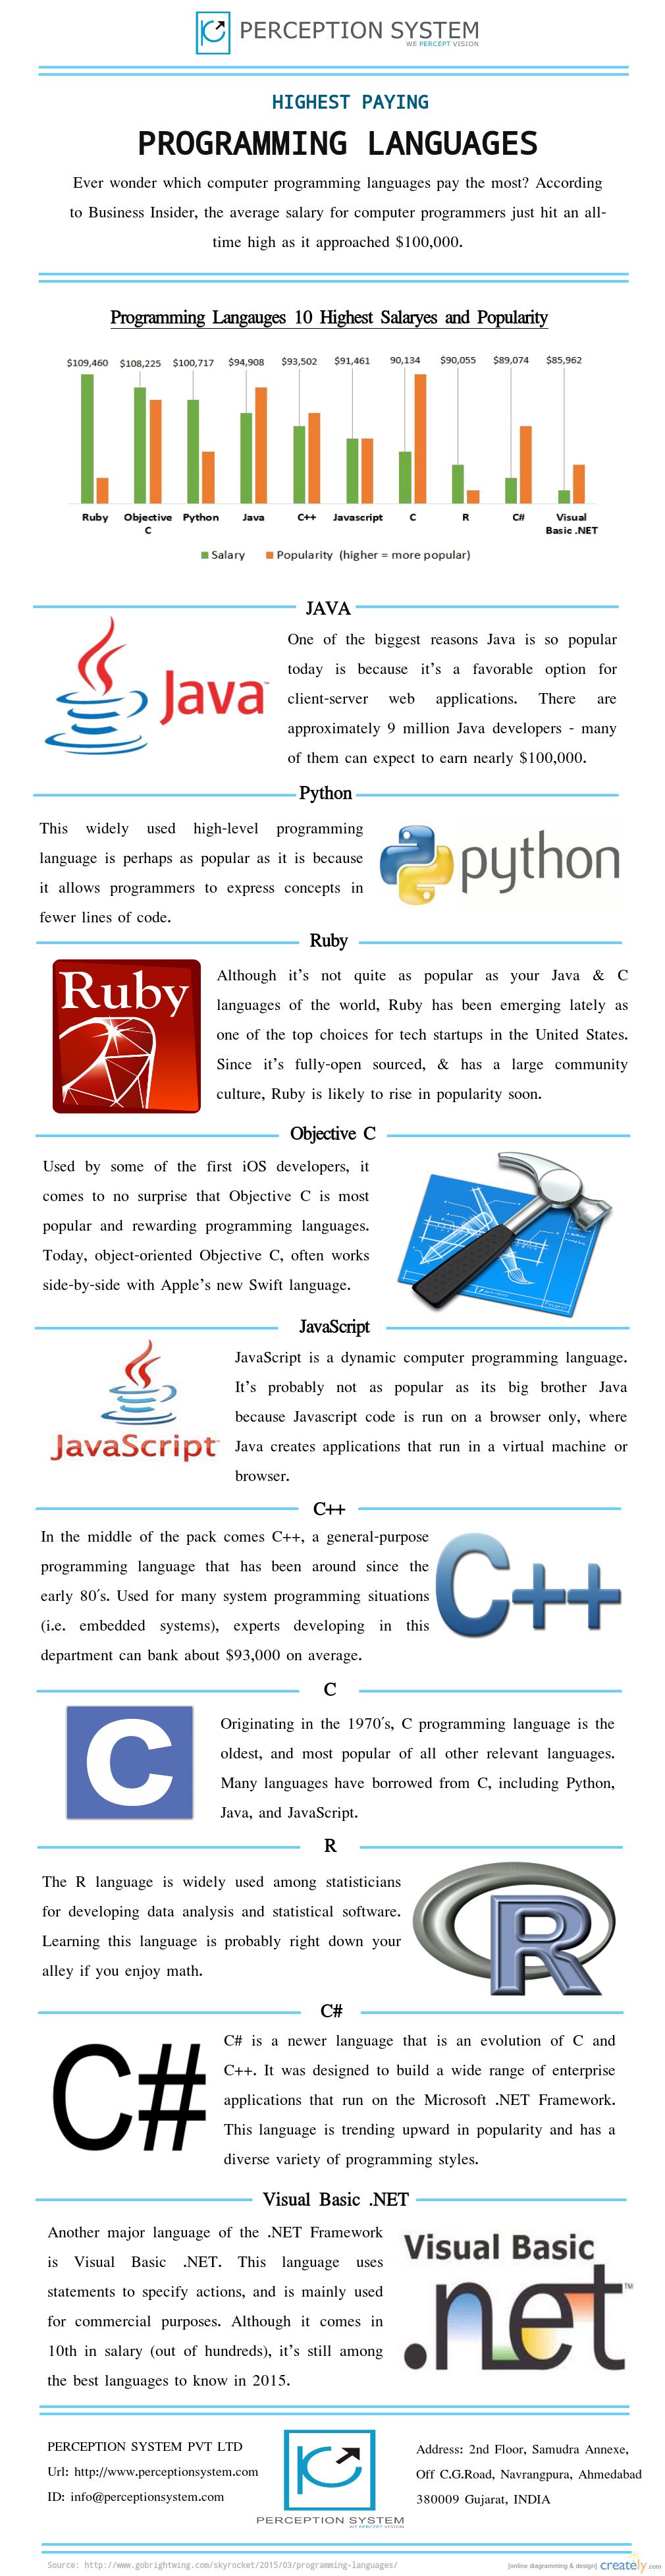 highest paying programming languages Visual.ly